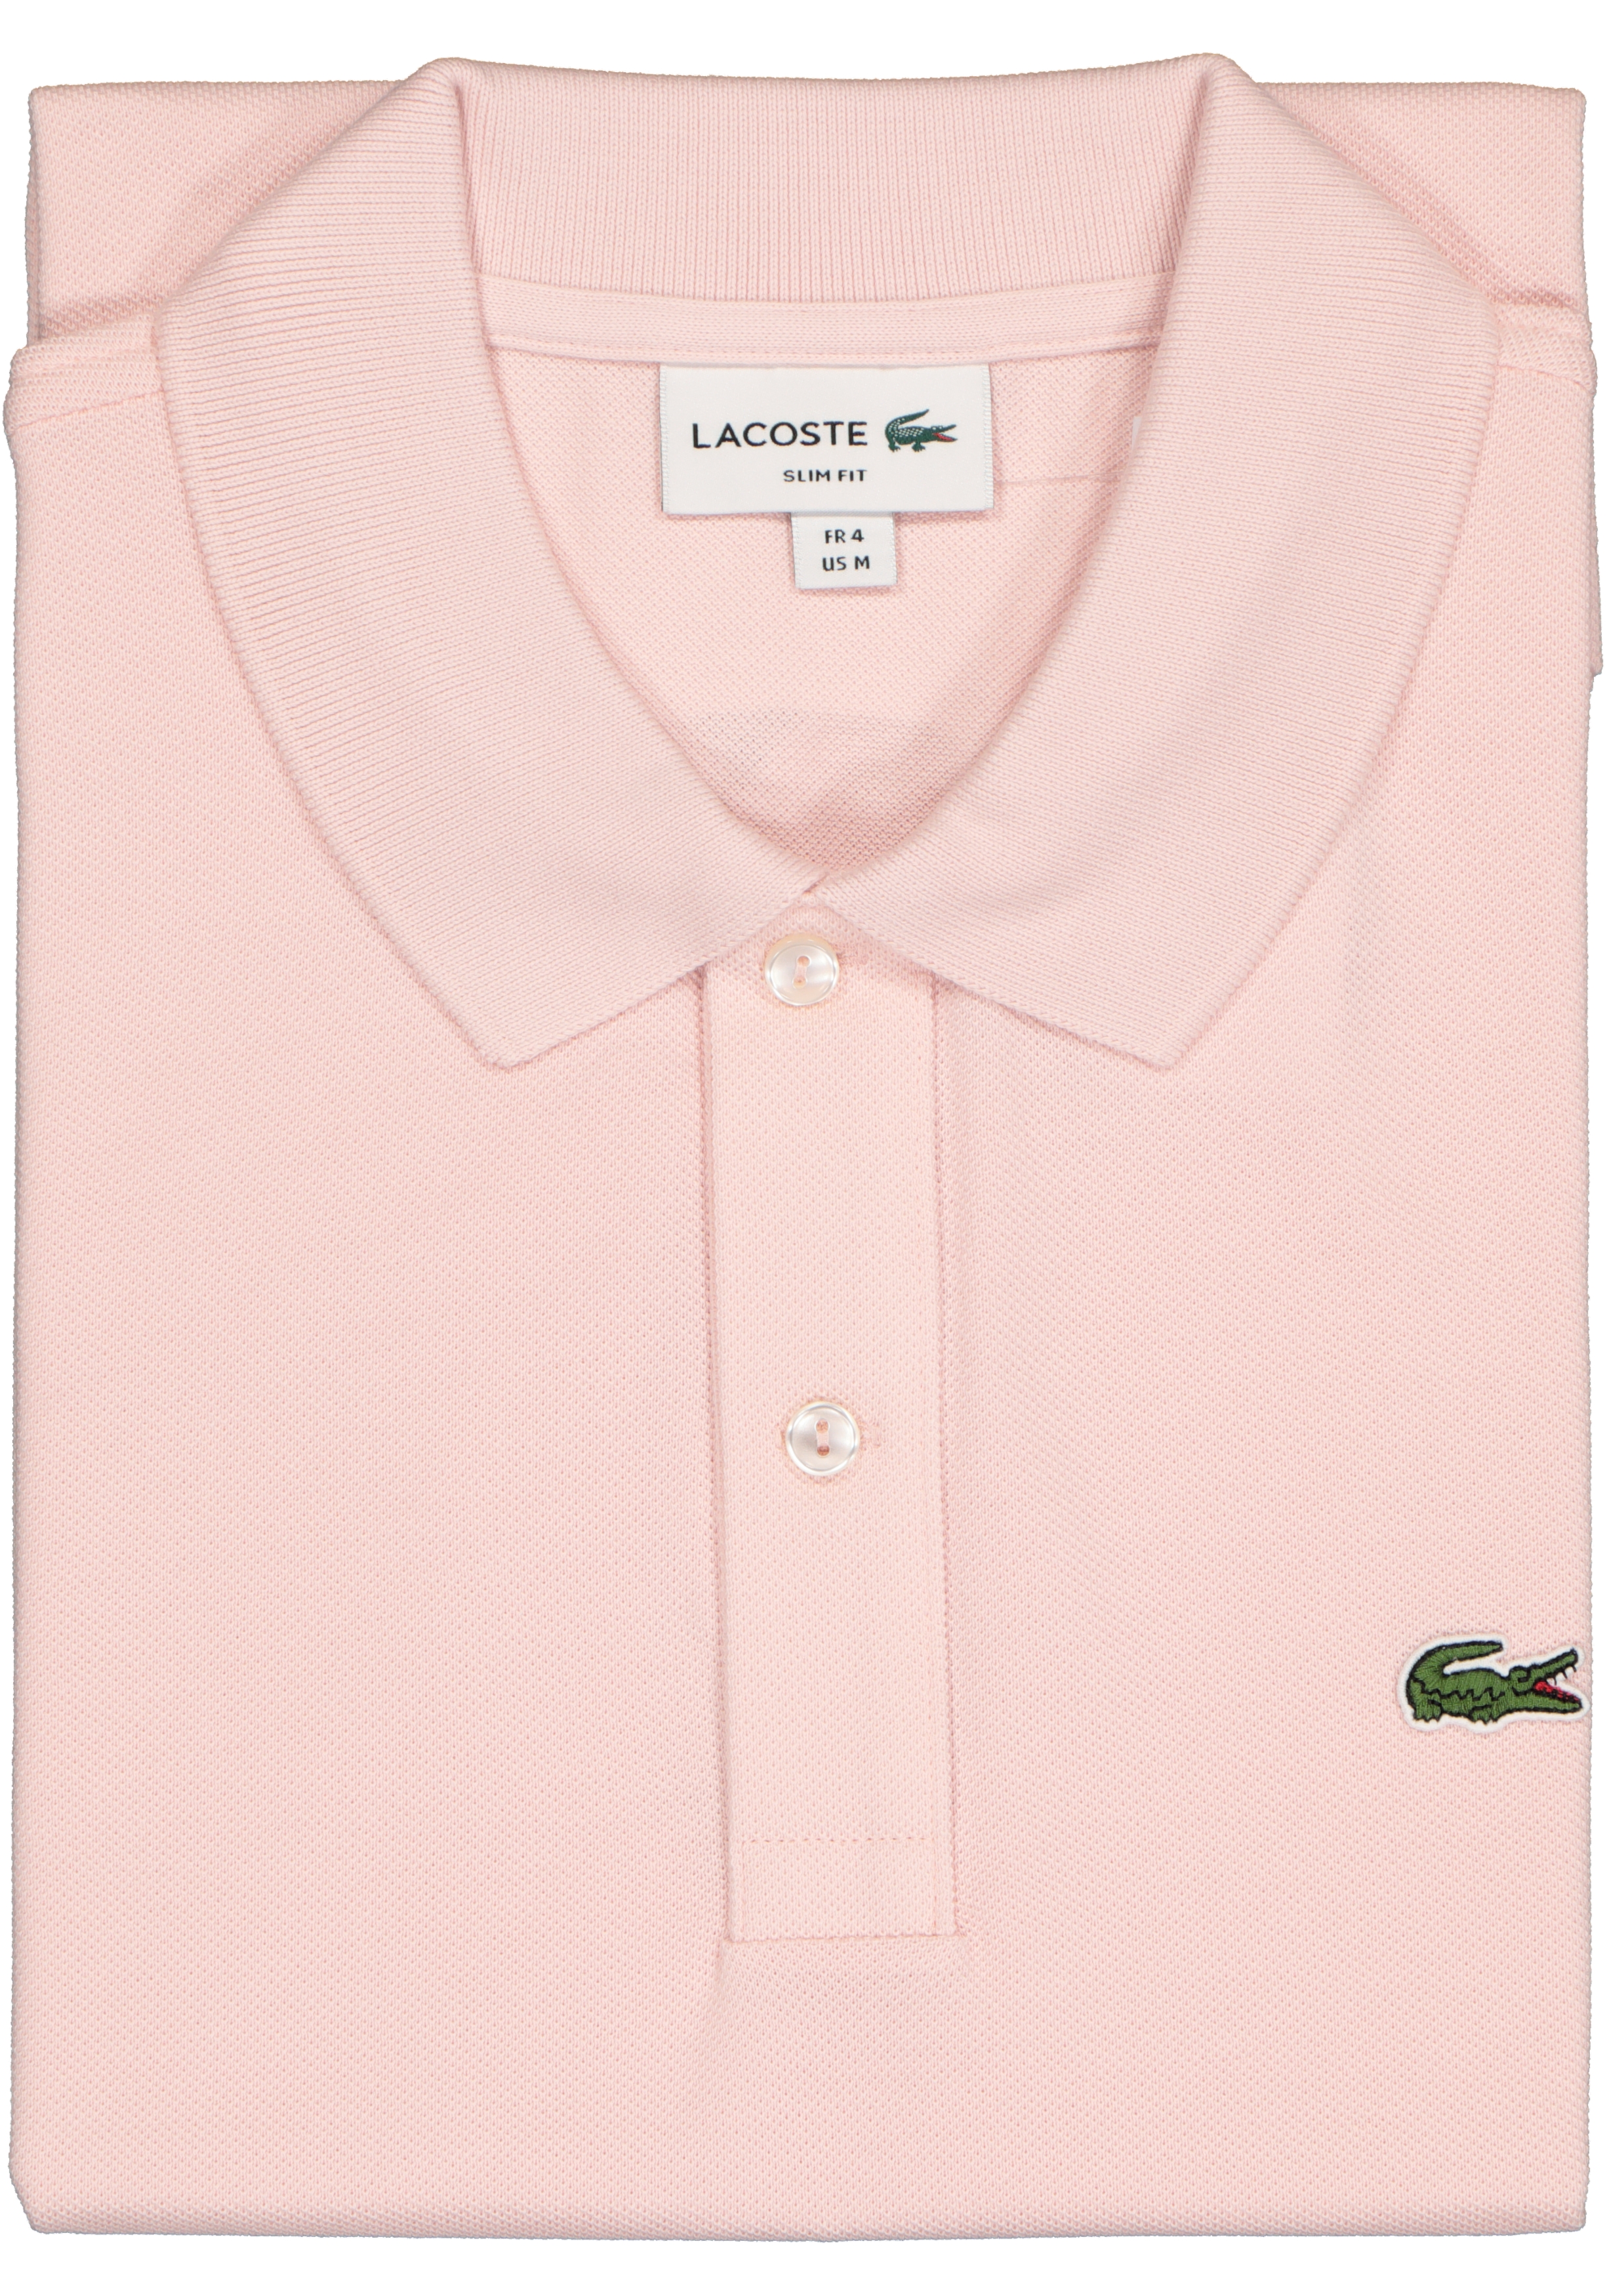 Mode Tops Polotops Lacoste Polotop zwart casual uitstraling 